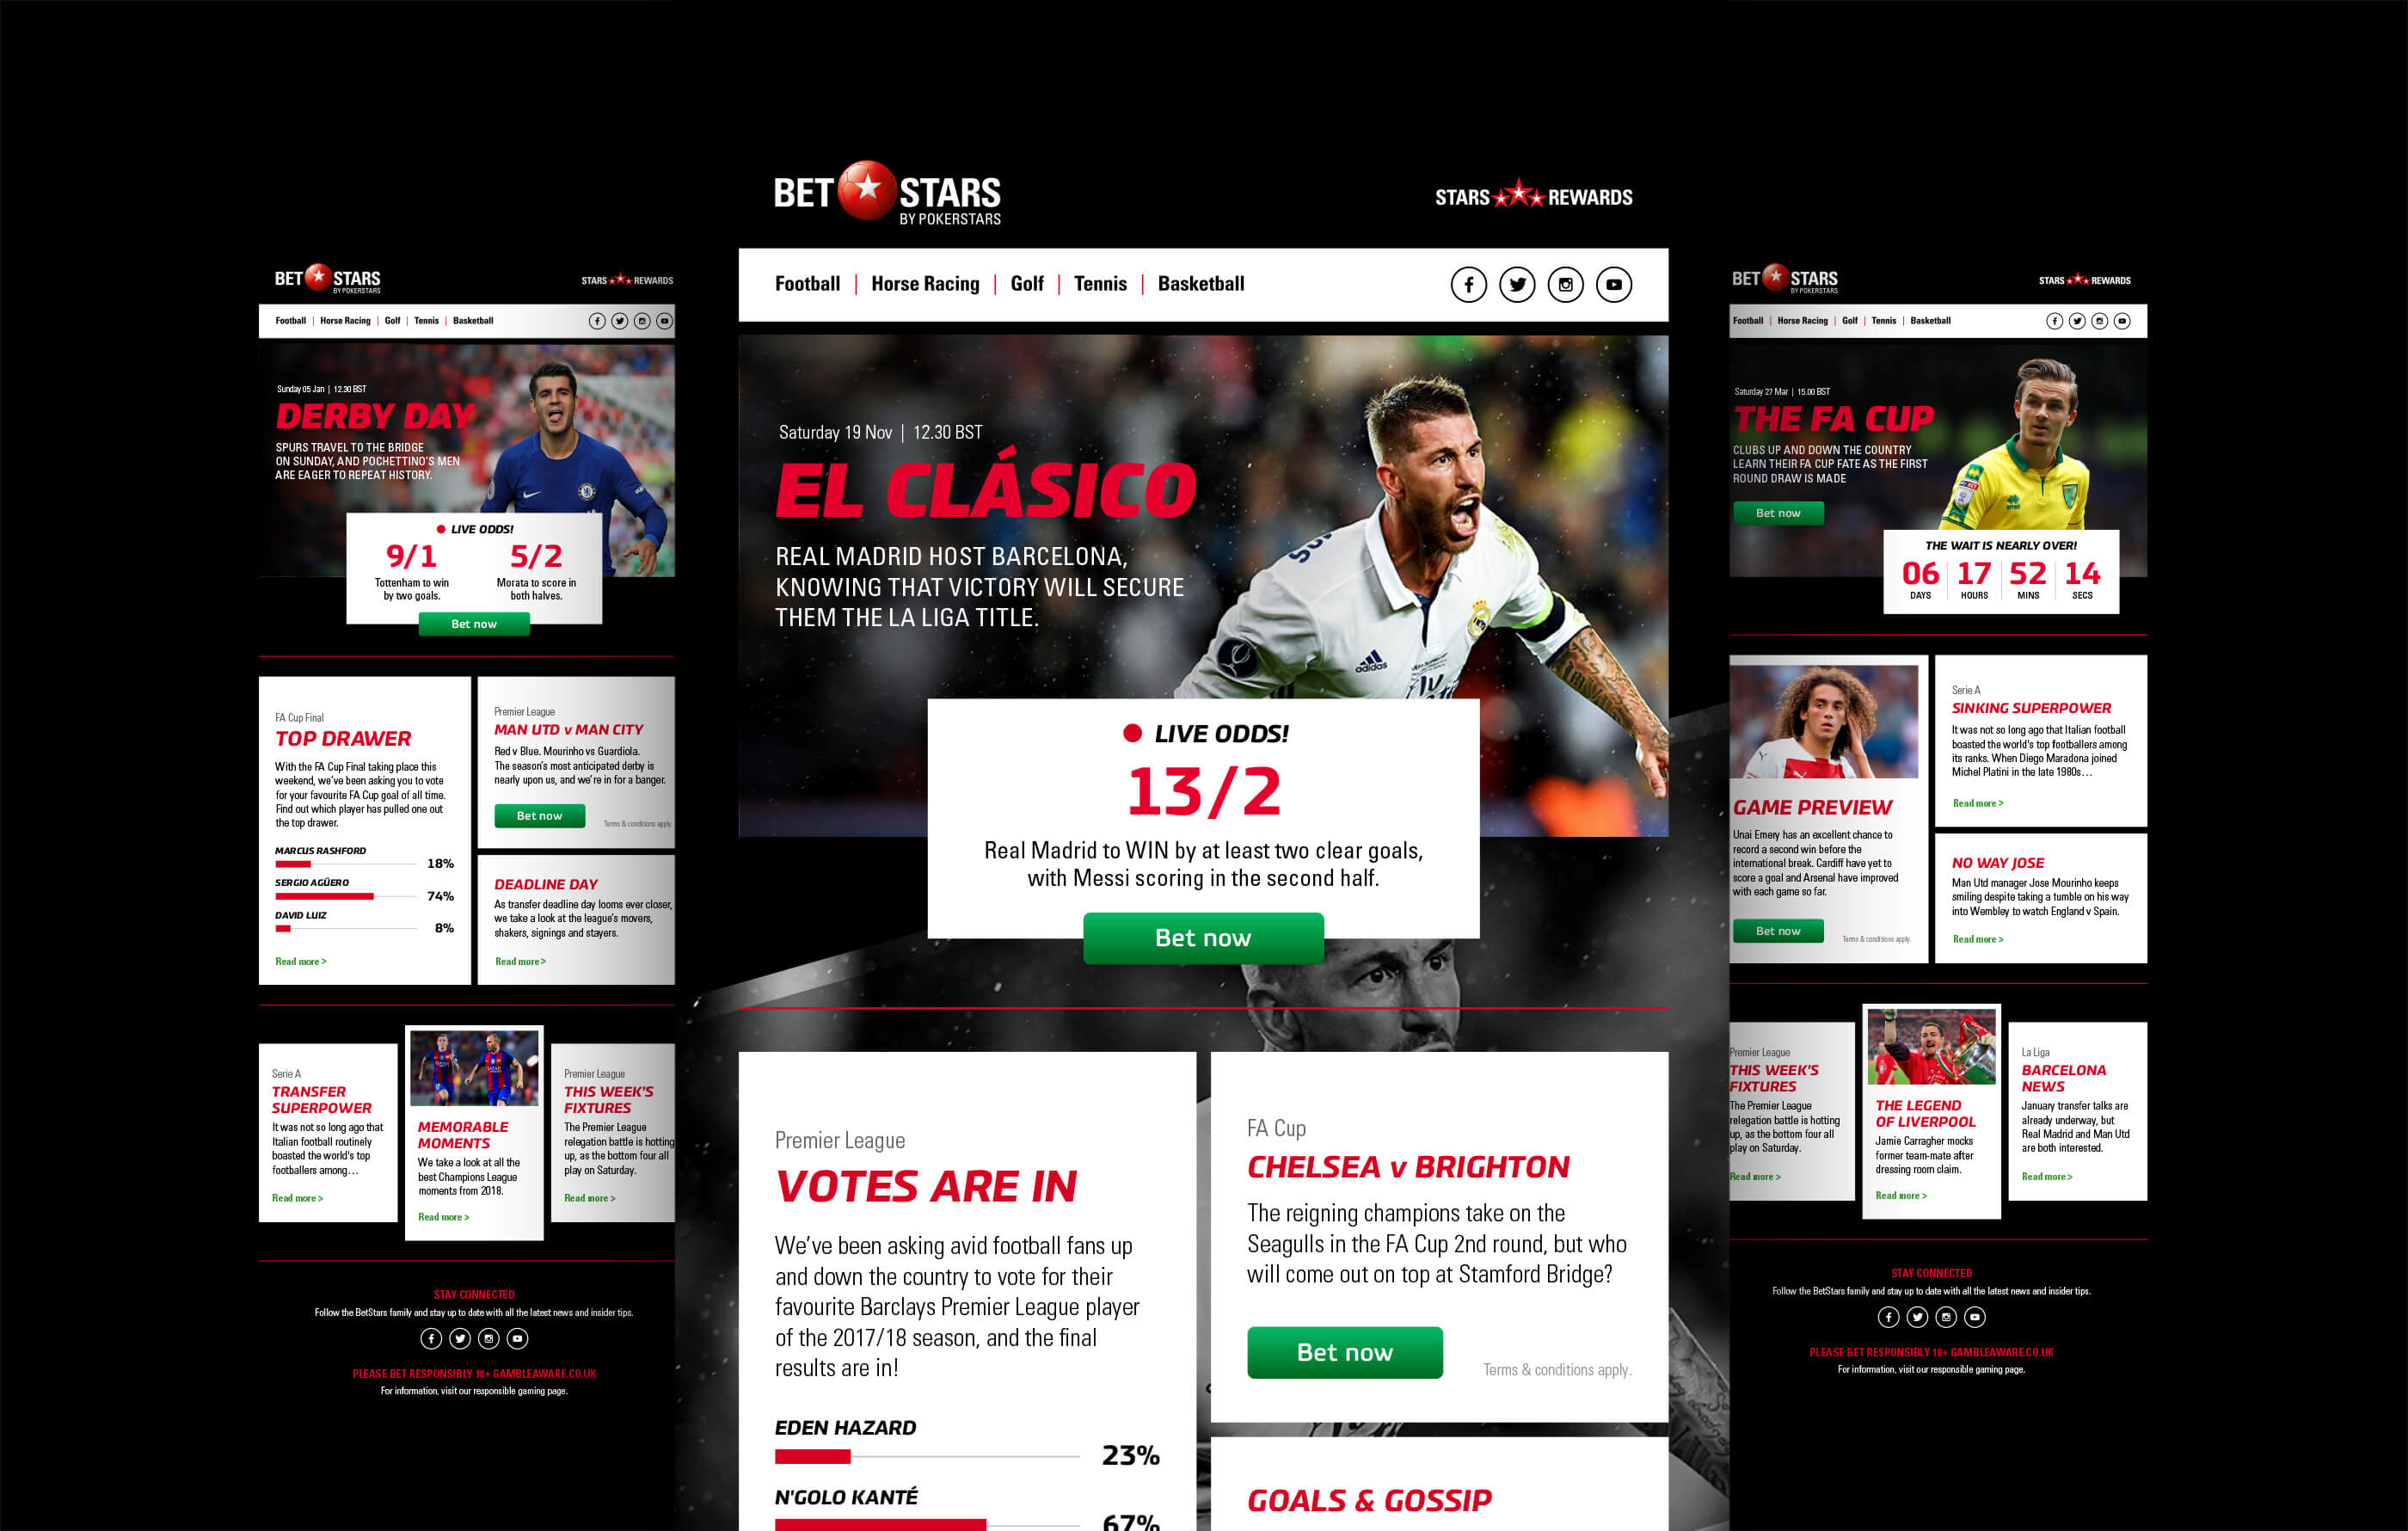 Suite of 3 PokerStars mailer designs, featuring La Liga, Premier League and FA Cup action, goals, gossip and fixtures